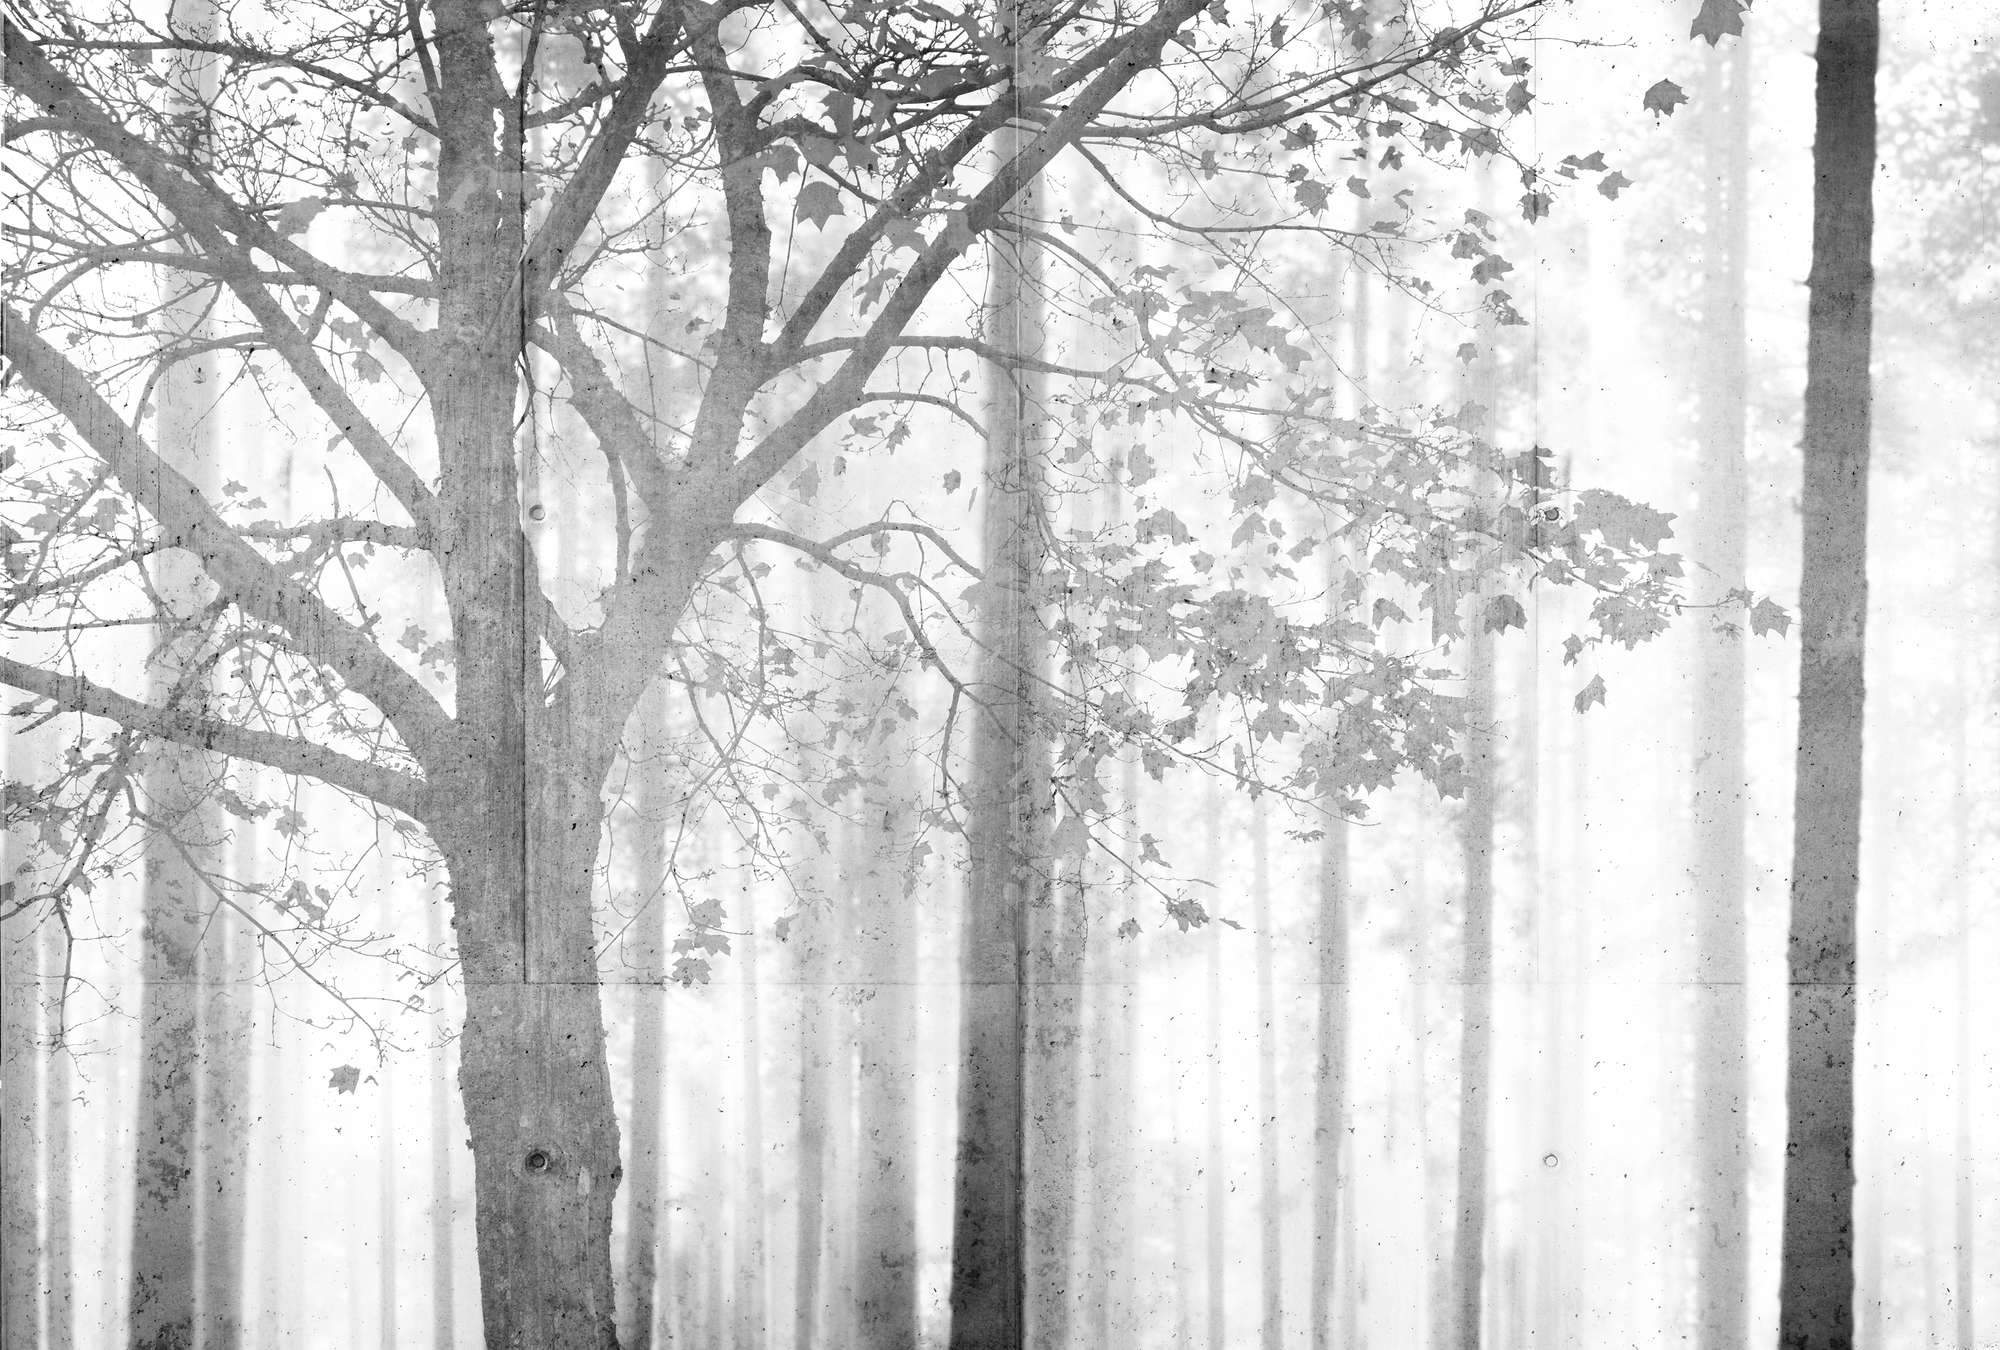             Photo wallpaper forest in black and white with grey shading - grey, white, black
        